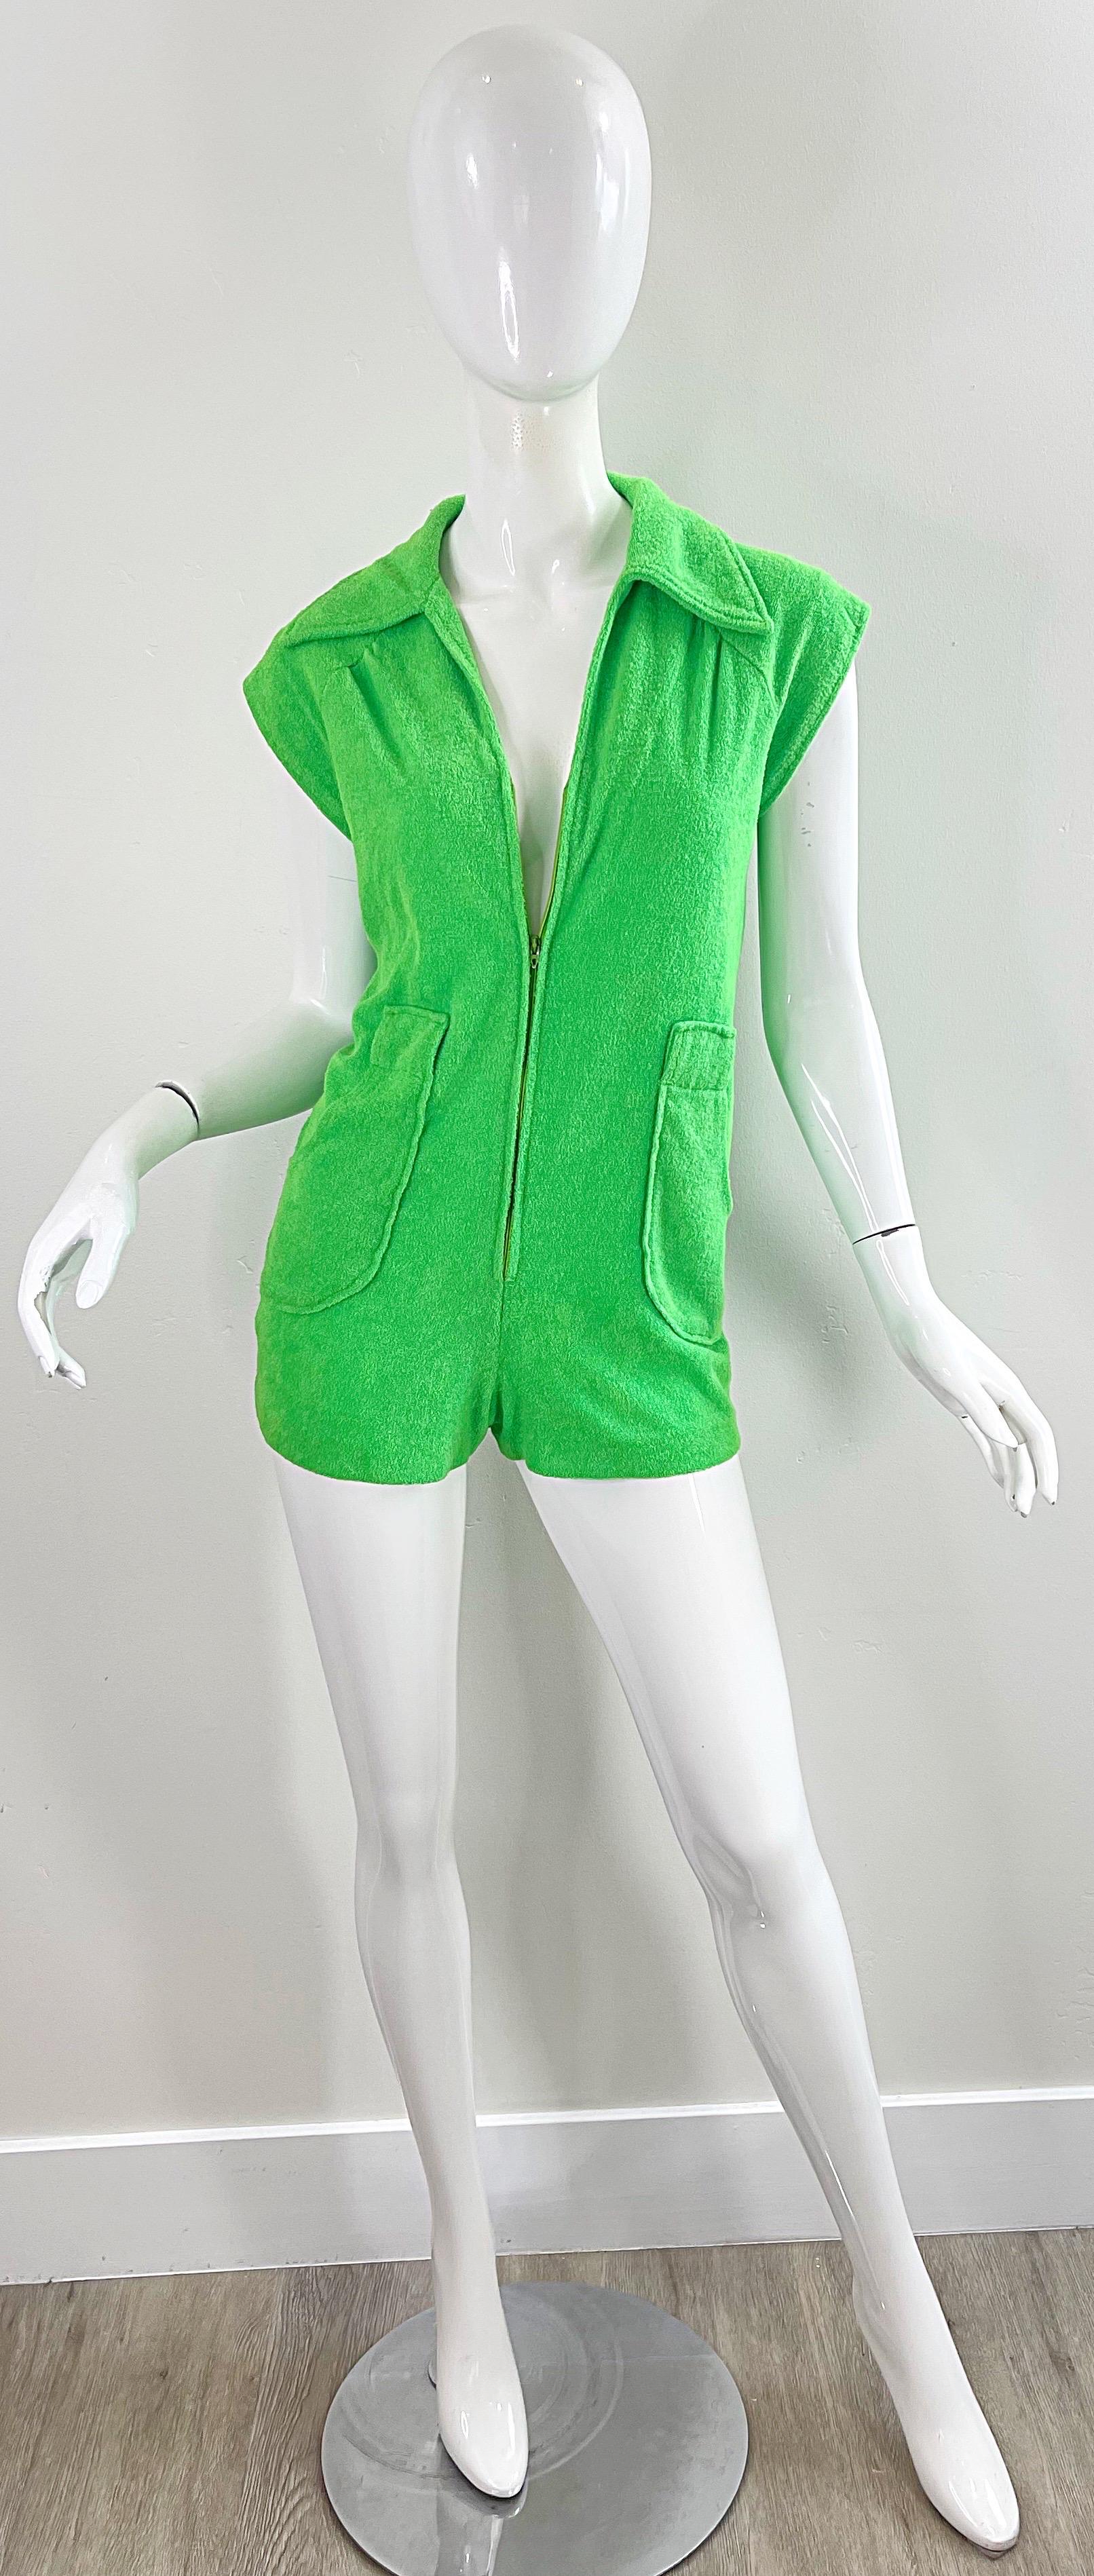 Amazing 1970s Terrycloth Neon Green Romper Vintage 70s Shorts Jumpsuit For Sale 4